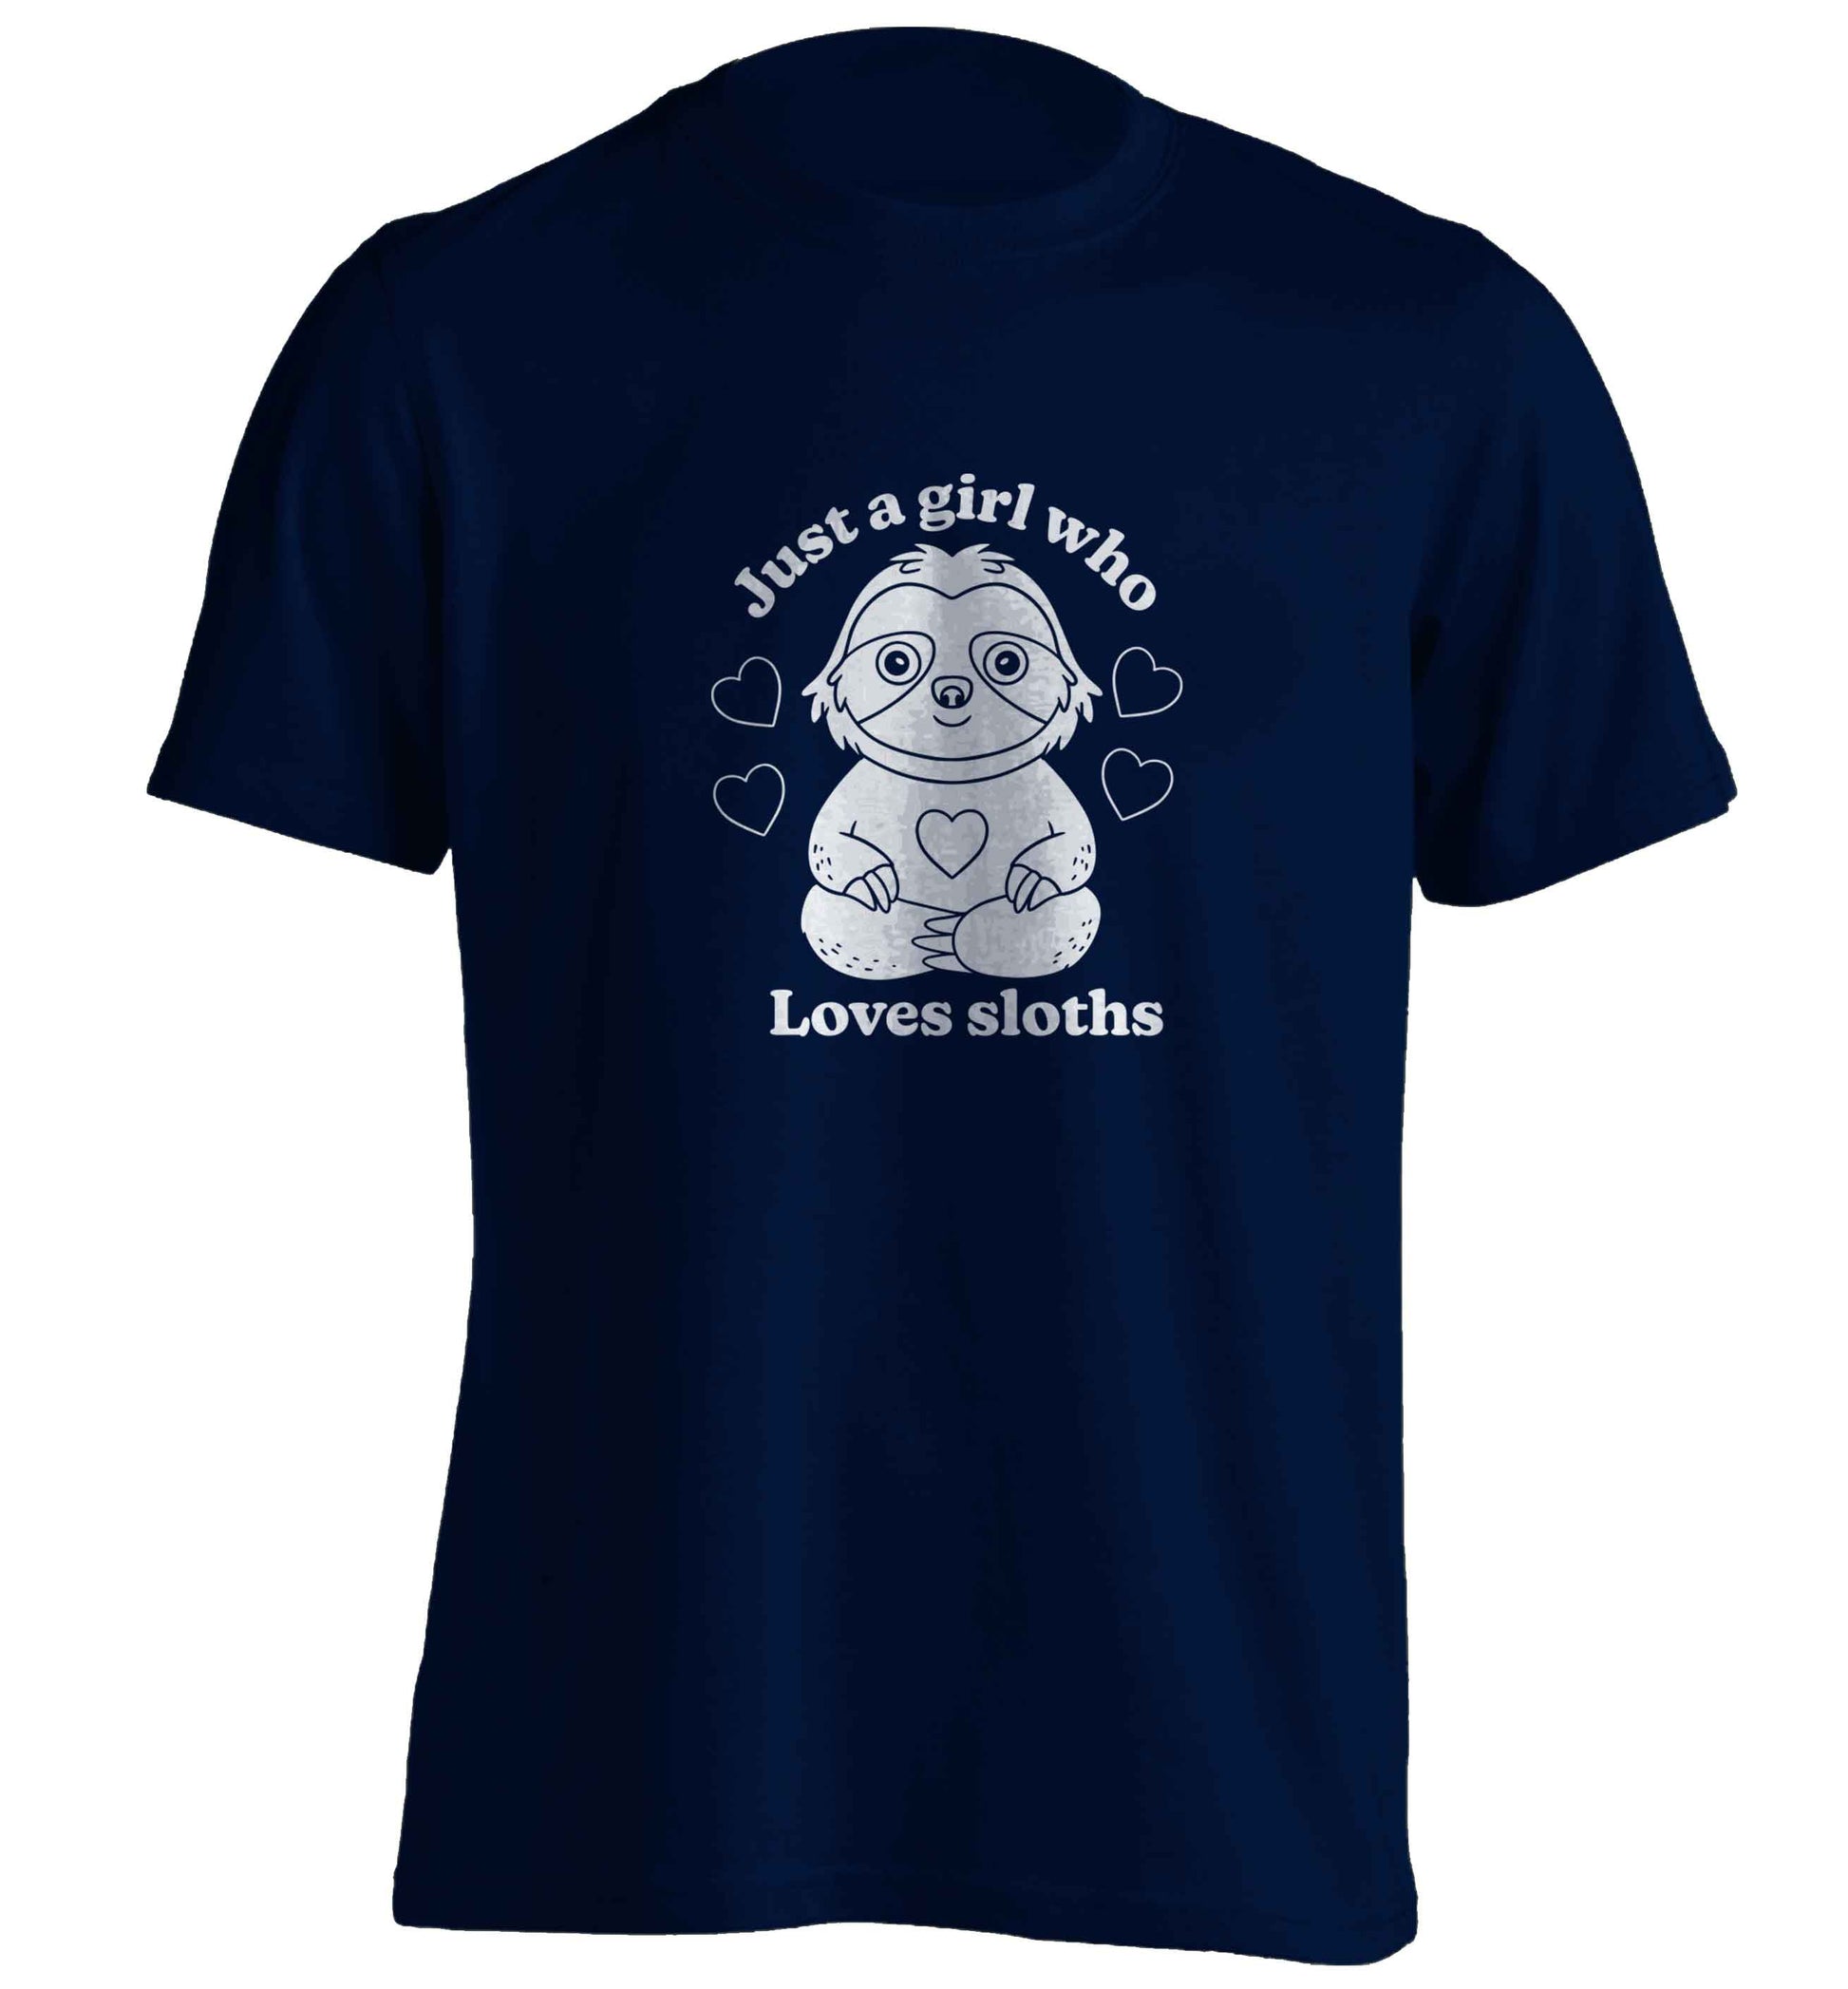 Just a girl who loves sloths adults unisex navy Tshirt 2XL